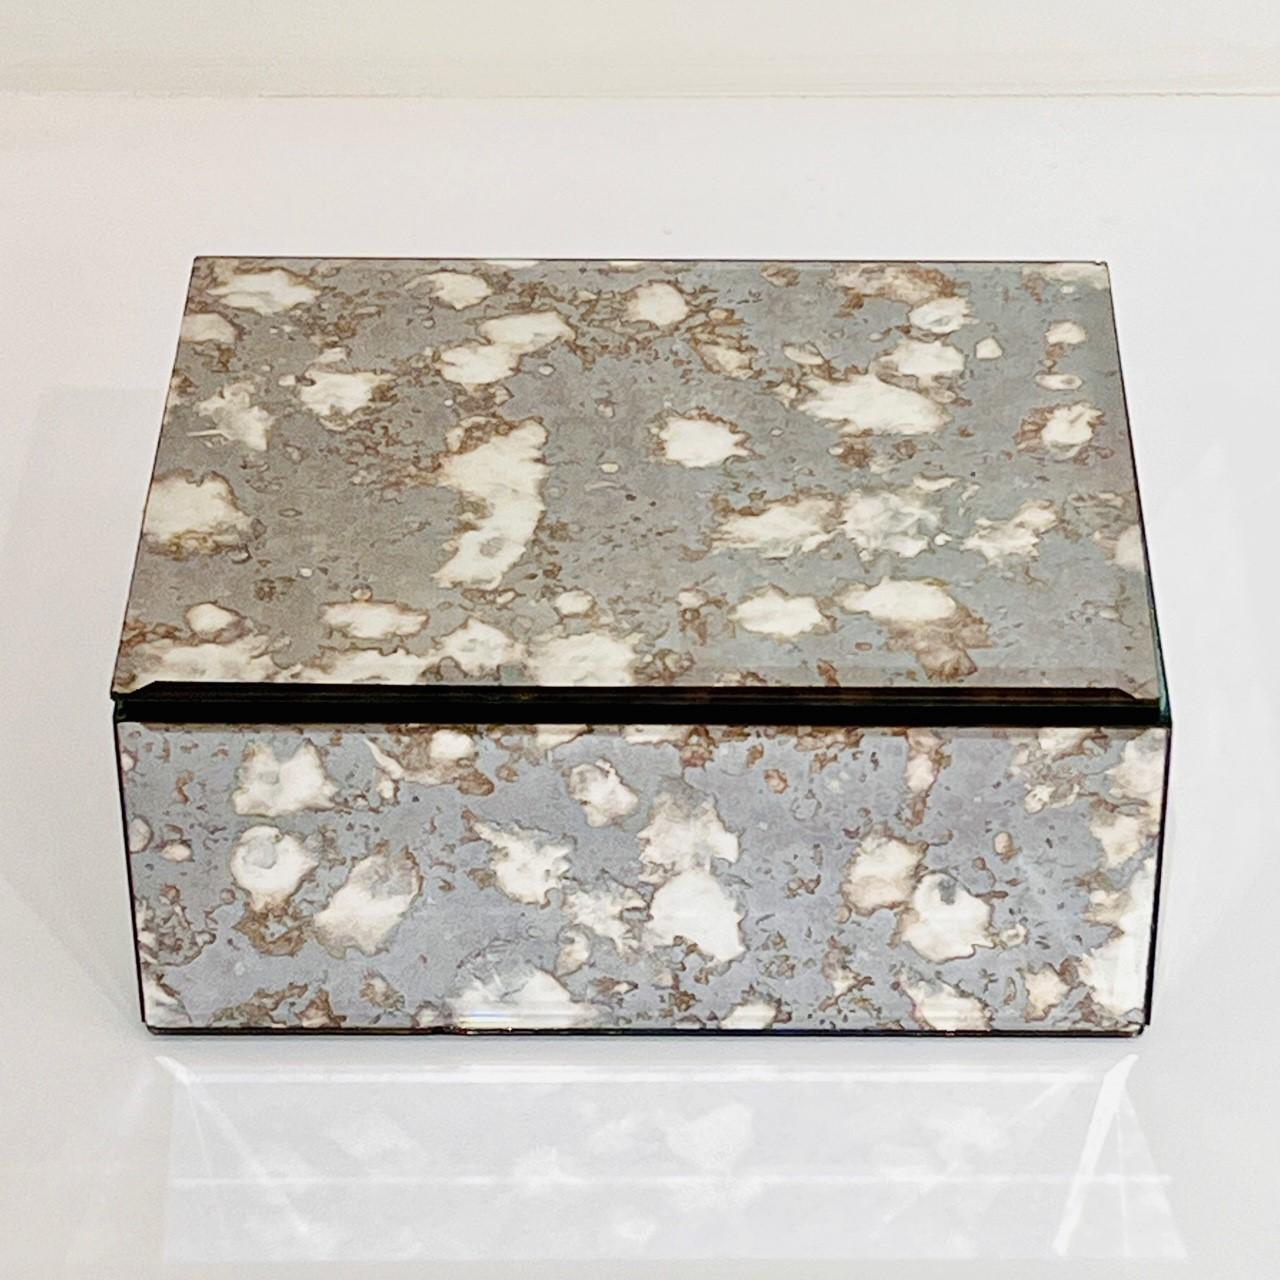 Late 20th Century Mirrored Jewelry Box in Antique Grey and Bronze Glass, c. 1980's For Sale